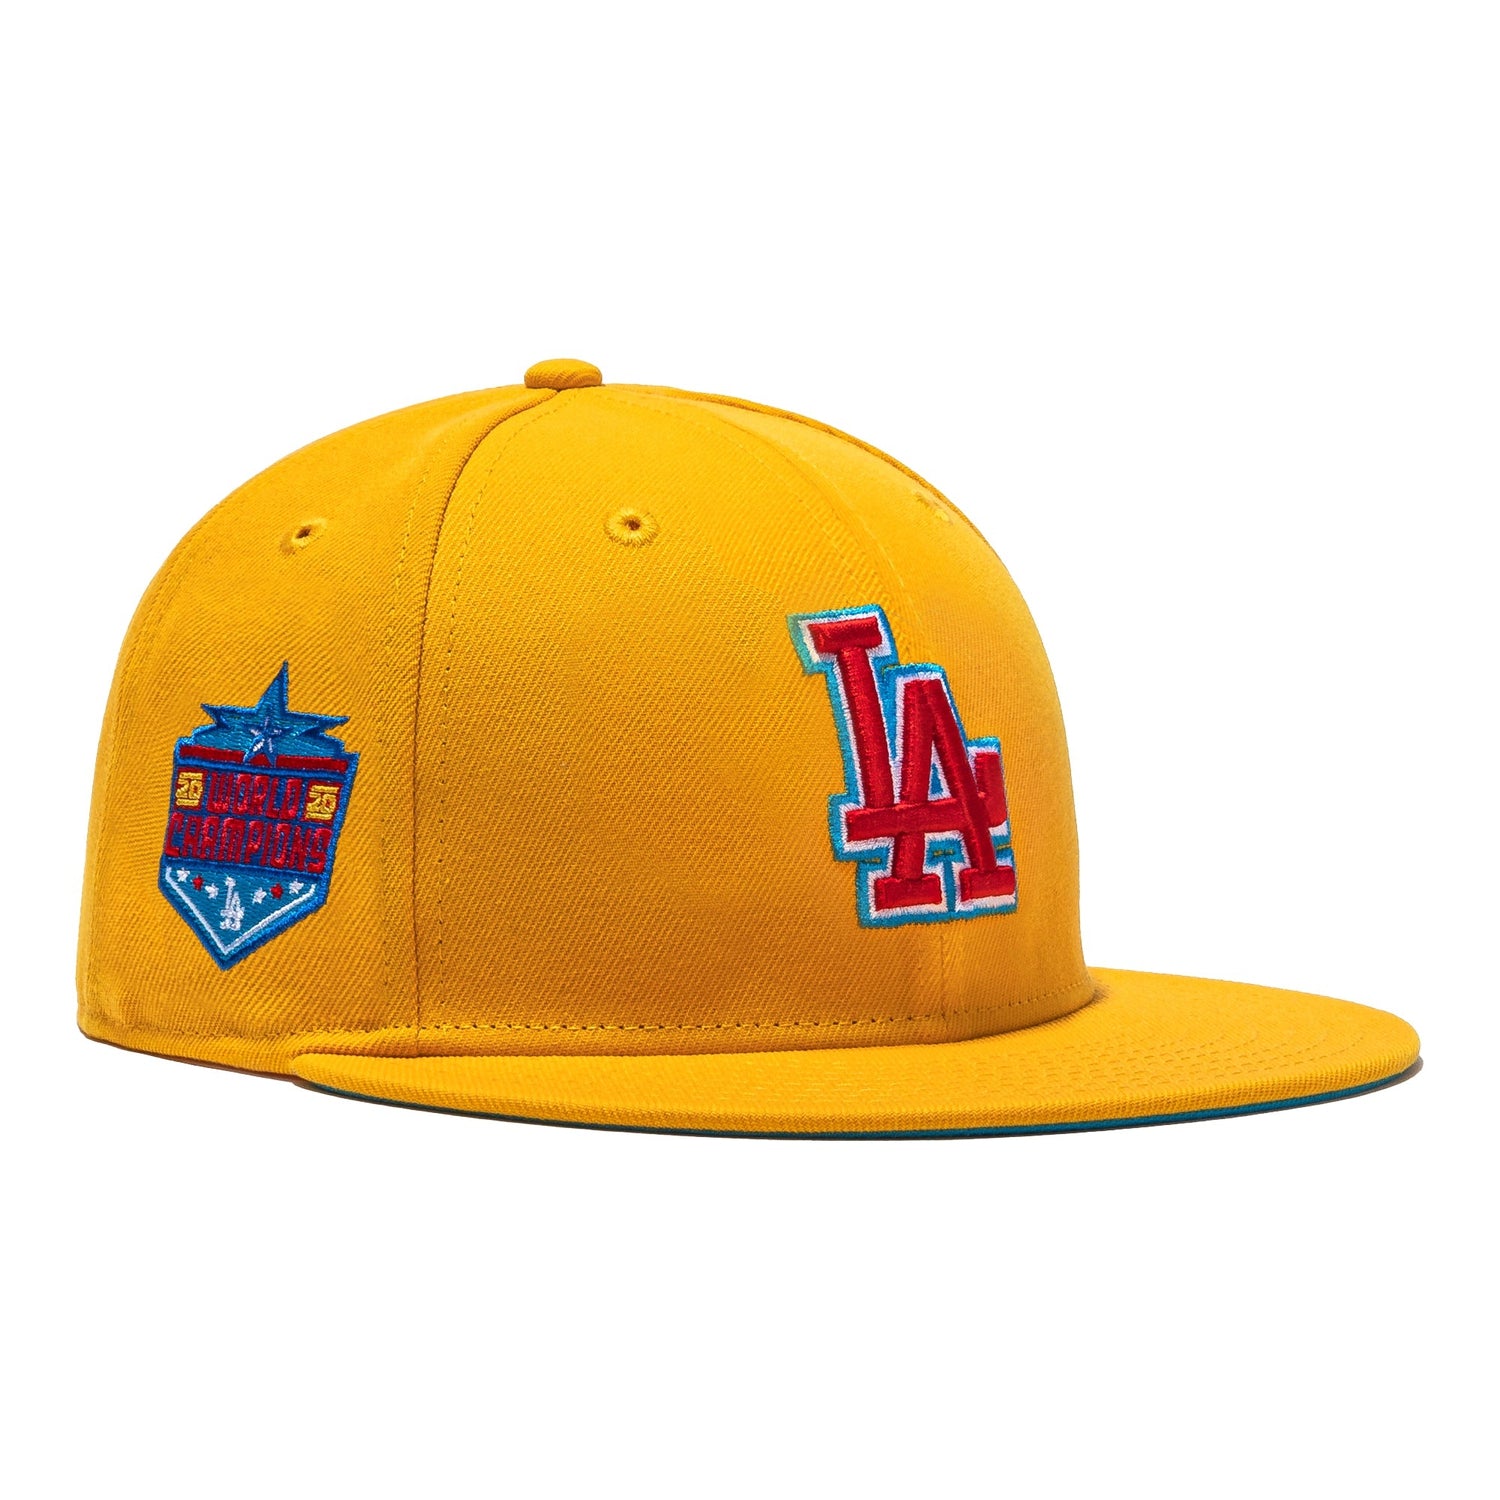 Boston Red Sox Graphite/Blue with Yellow UV 1967 World Champions